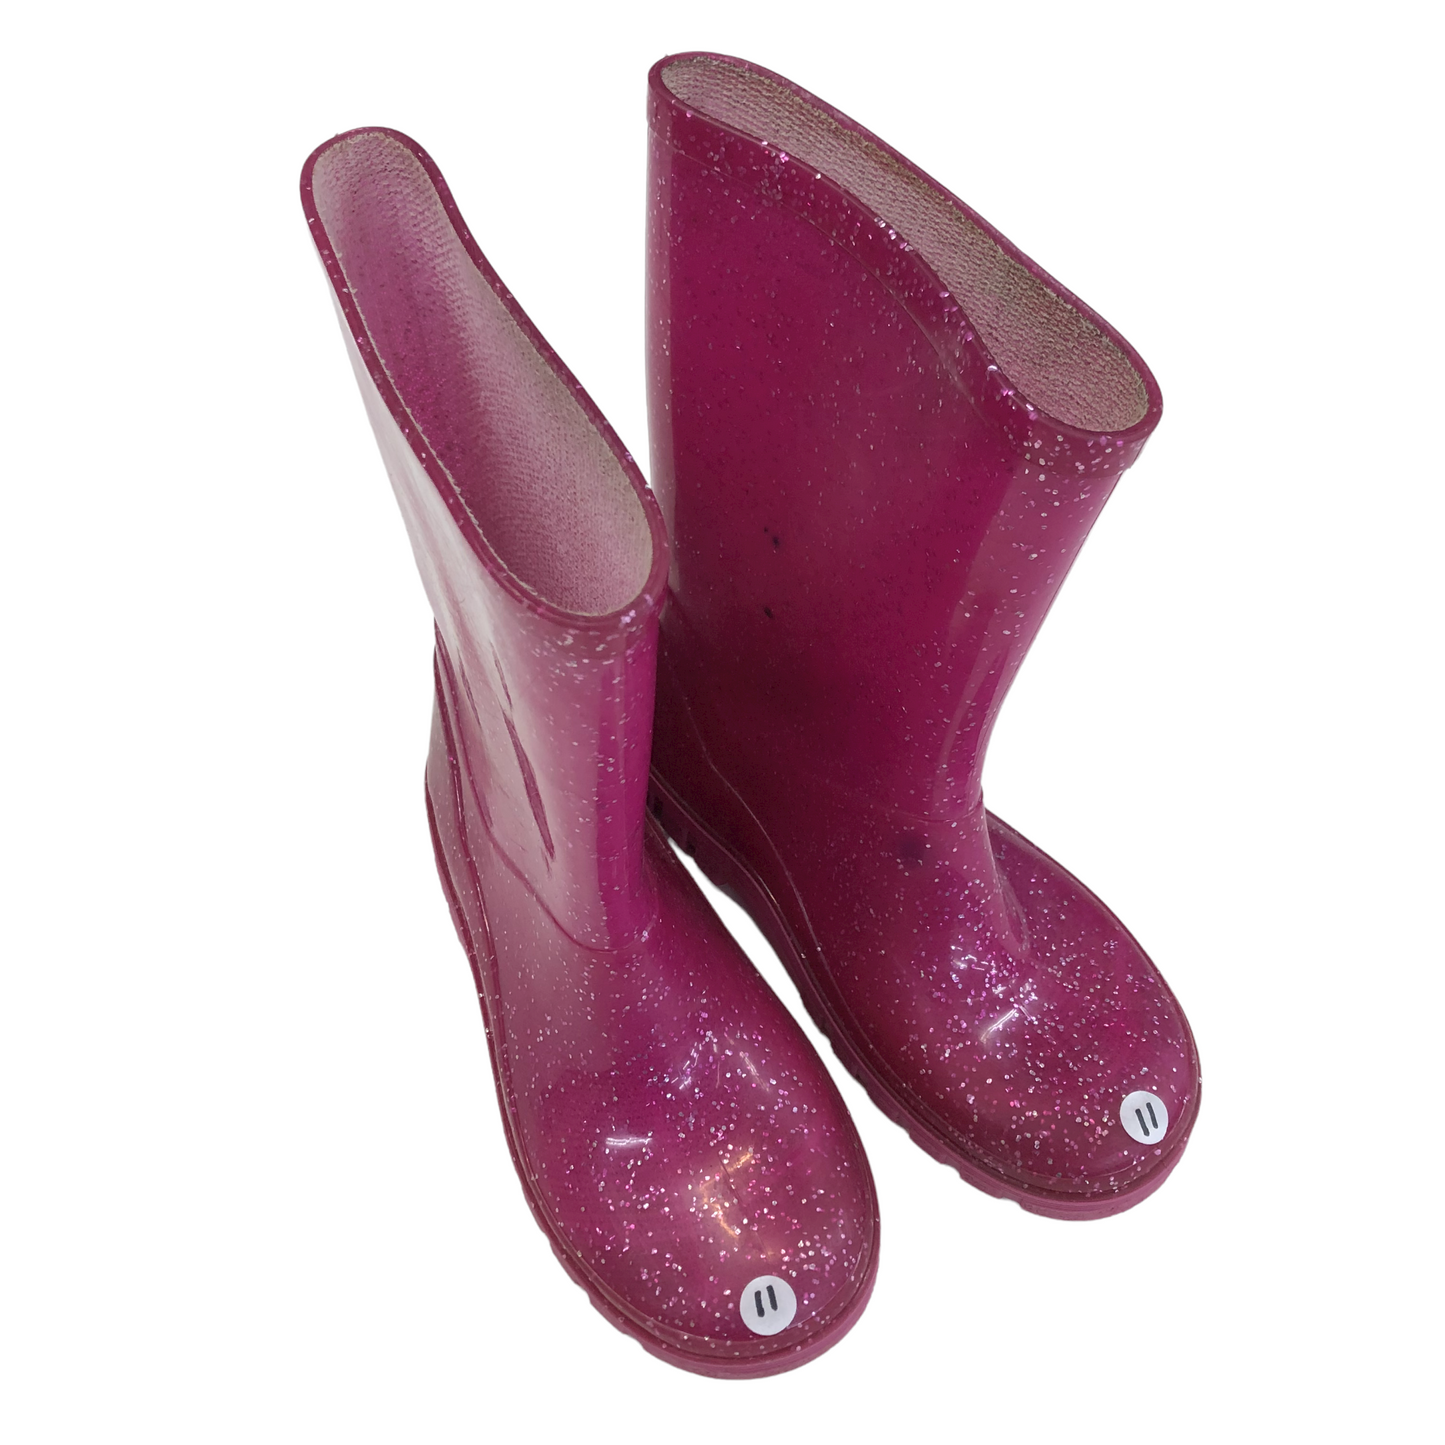 Sparkly Pink Wellies Shoe Size 11 (jr)